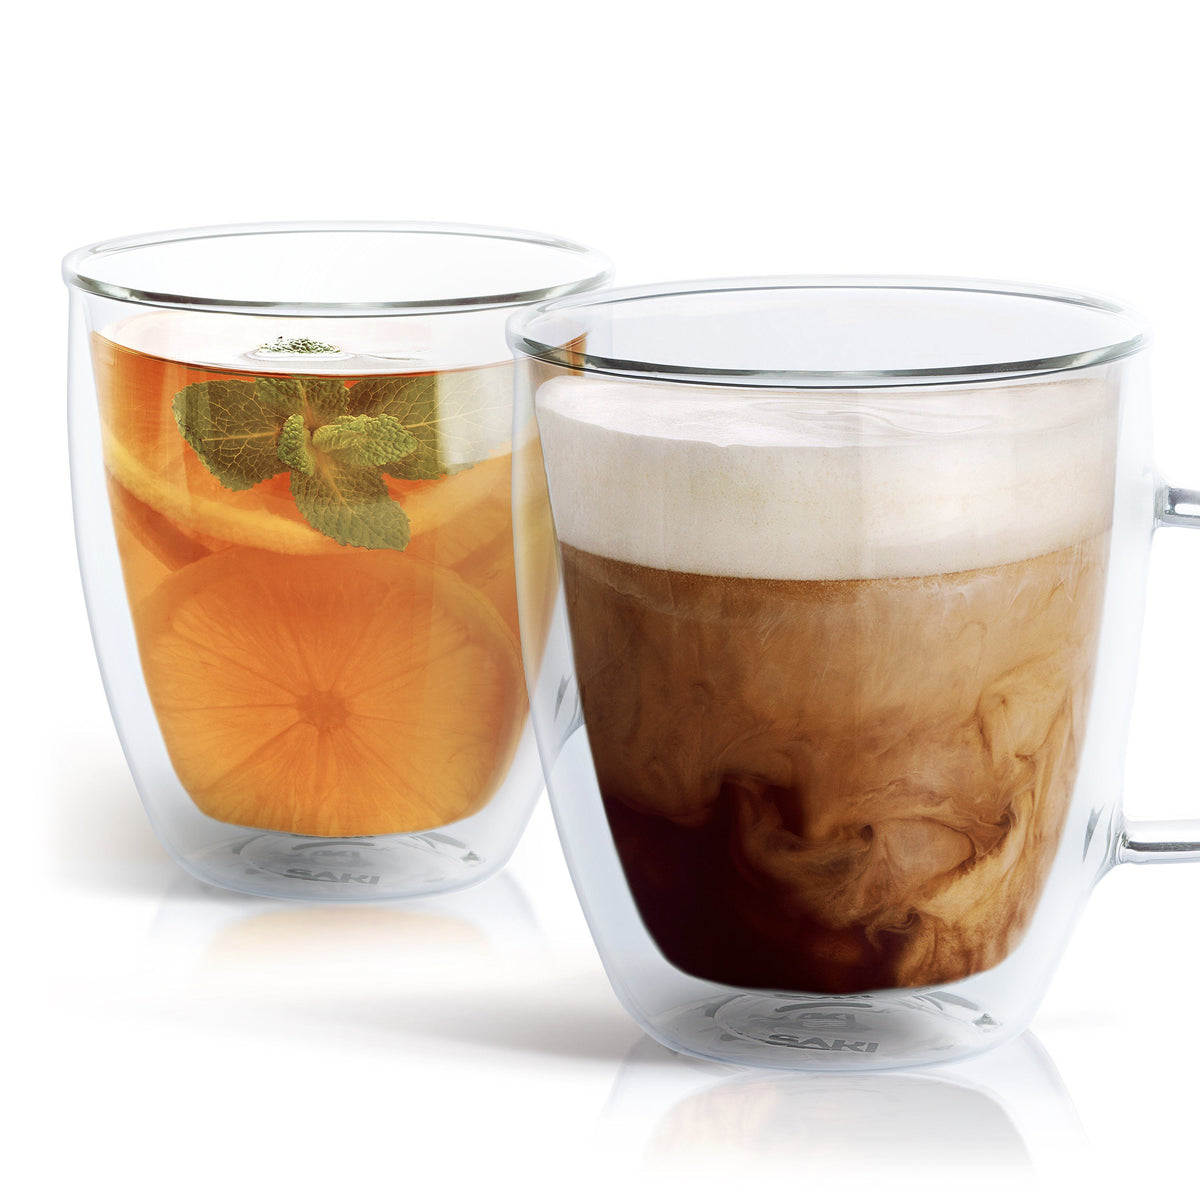 Double Walled Mugs – ICA Retail Store